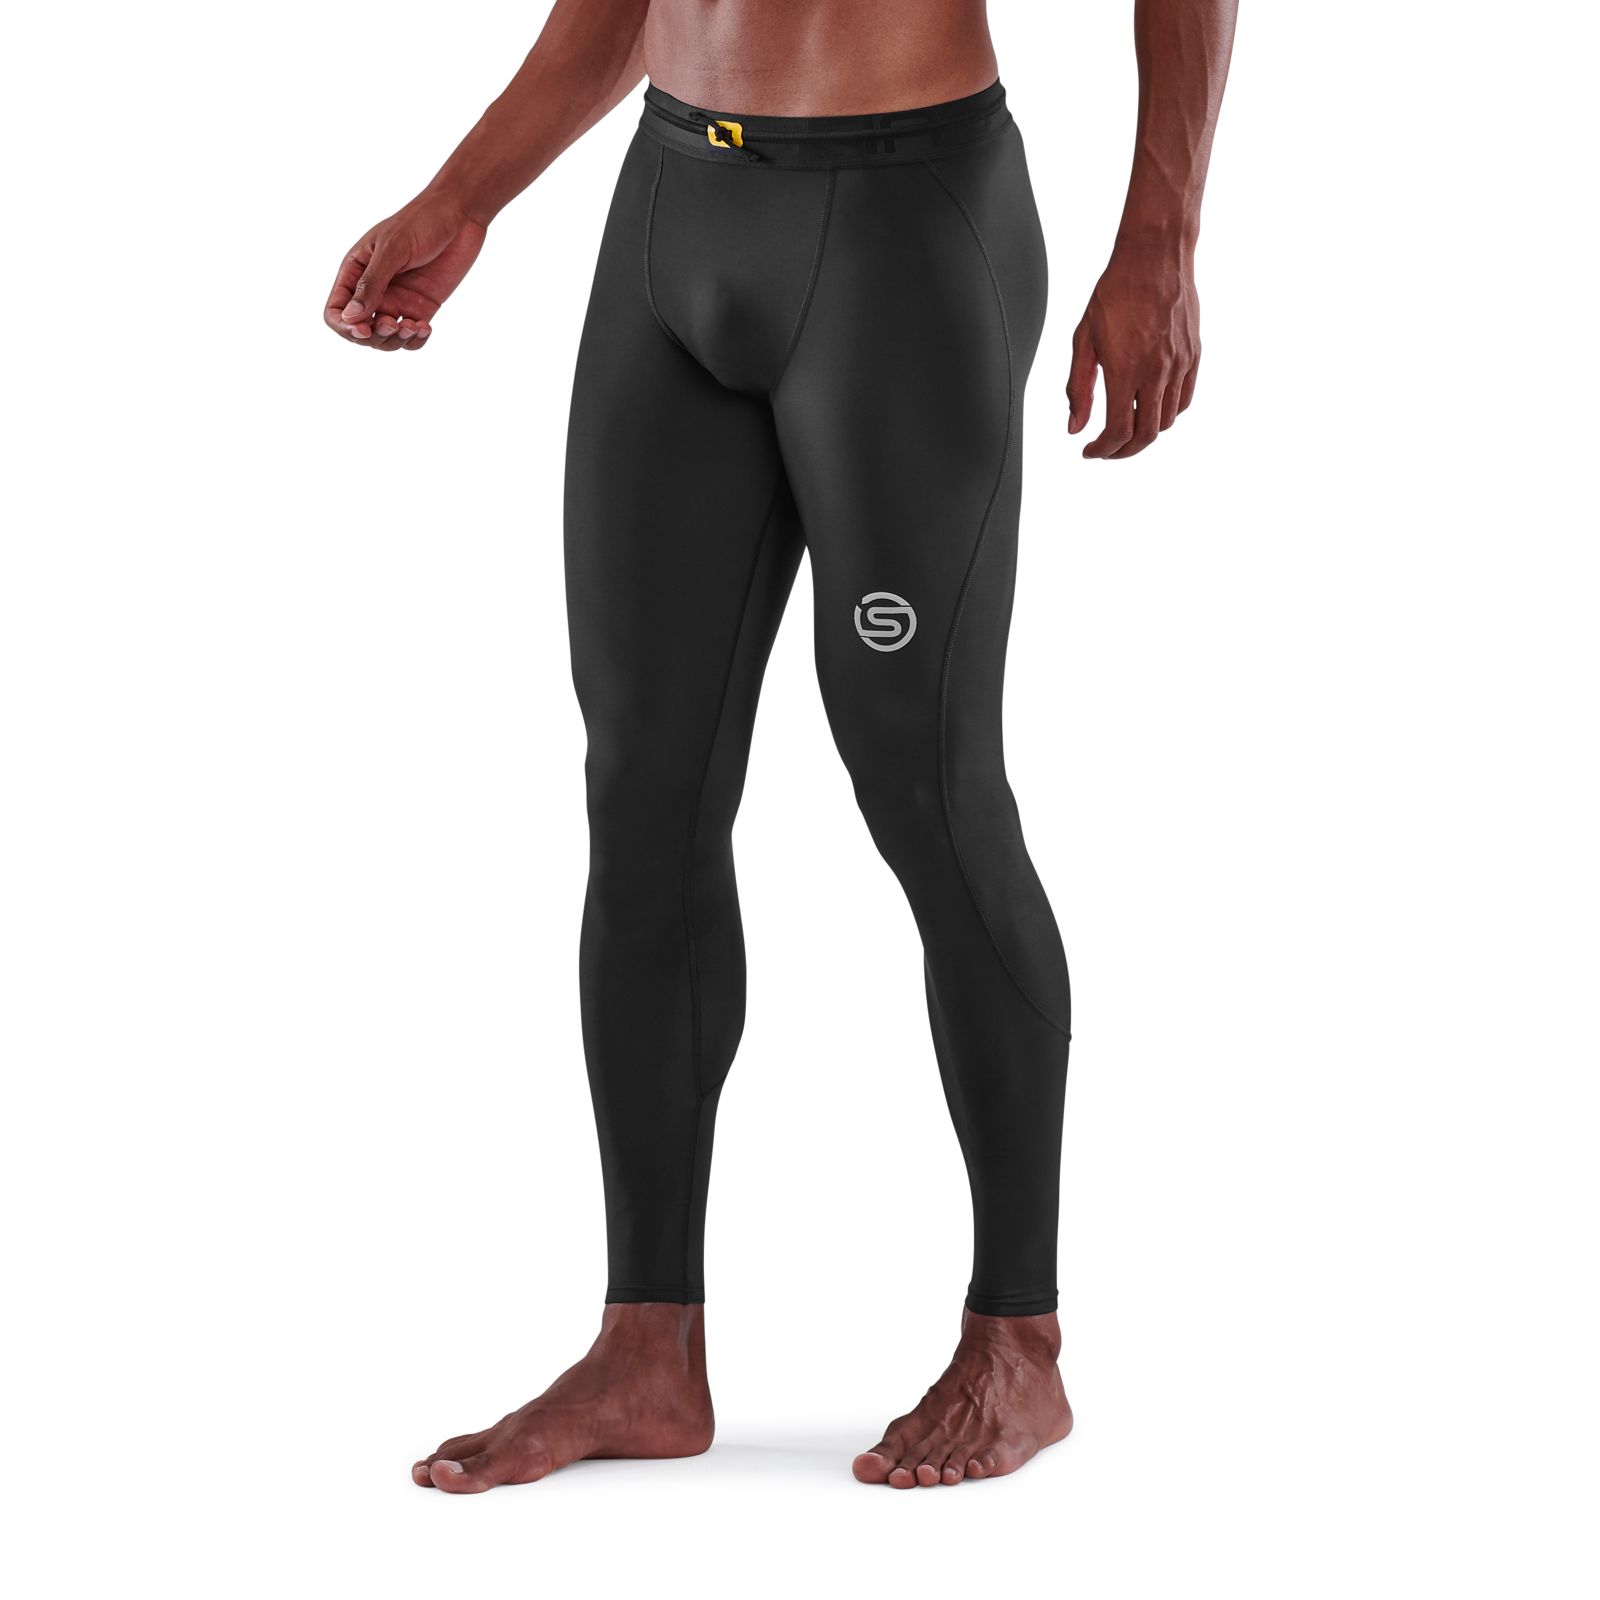 SKINS SERIES-3 MEN\'S TRAVEL Compression BLACK TIGHTS - USA AND SKINS LONG RECOVERY